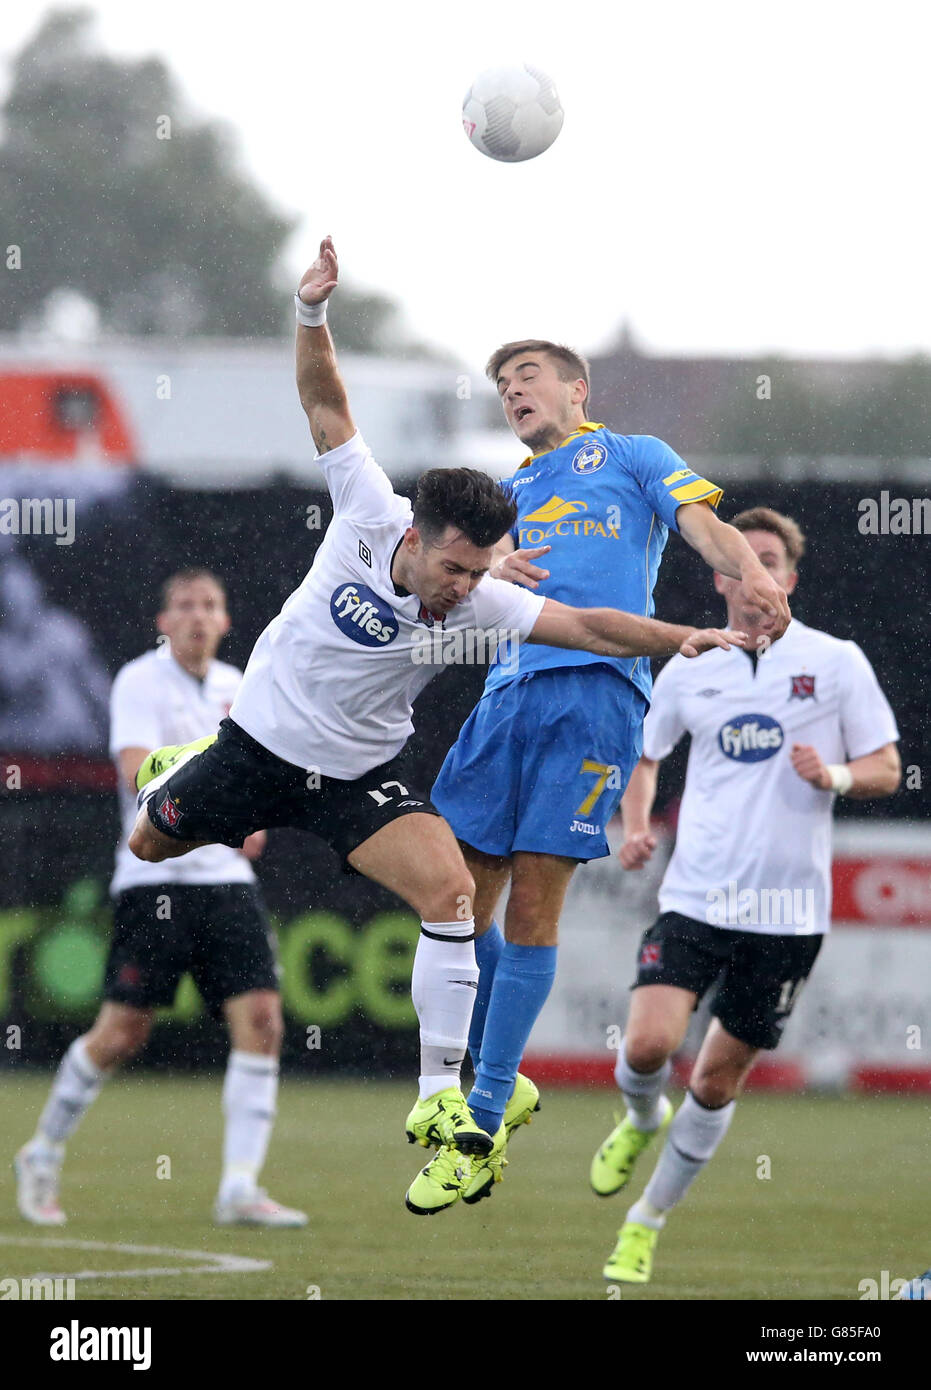 Dundalk's Richie Towell (left) and BATE Borisov's Aliaksandr Karnitski battle for the ball in the air during the UEFA Champions League Second Qualifying Round, Second Leg, at Oriel Park, Dundalk. Stock Photo